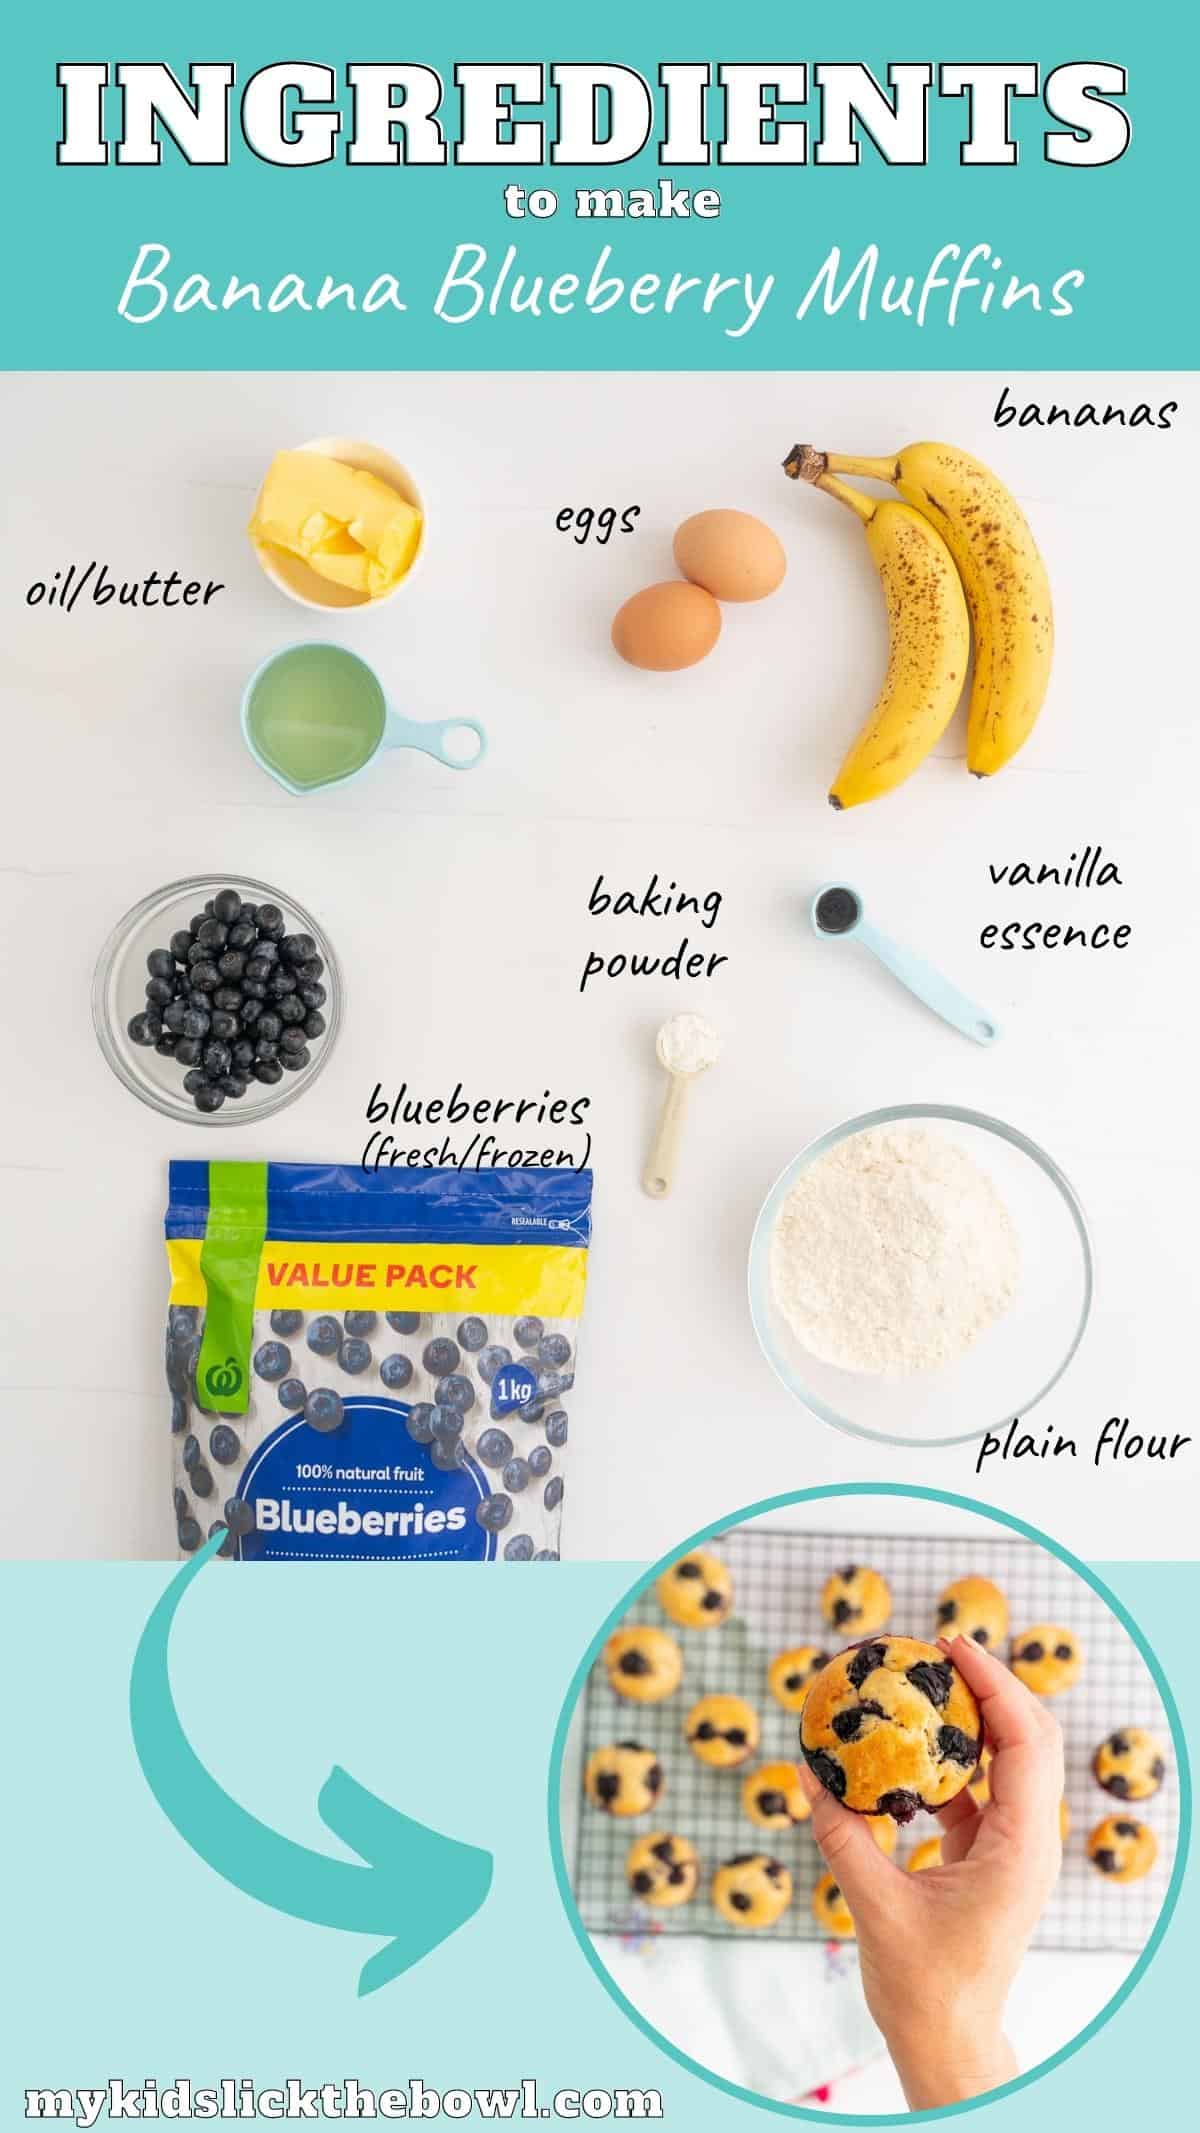 Ingredients to make banana blueberry muffins laid out on a counter top with text overlay.